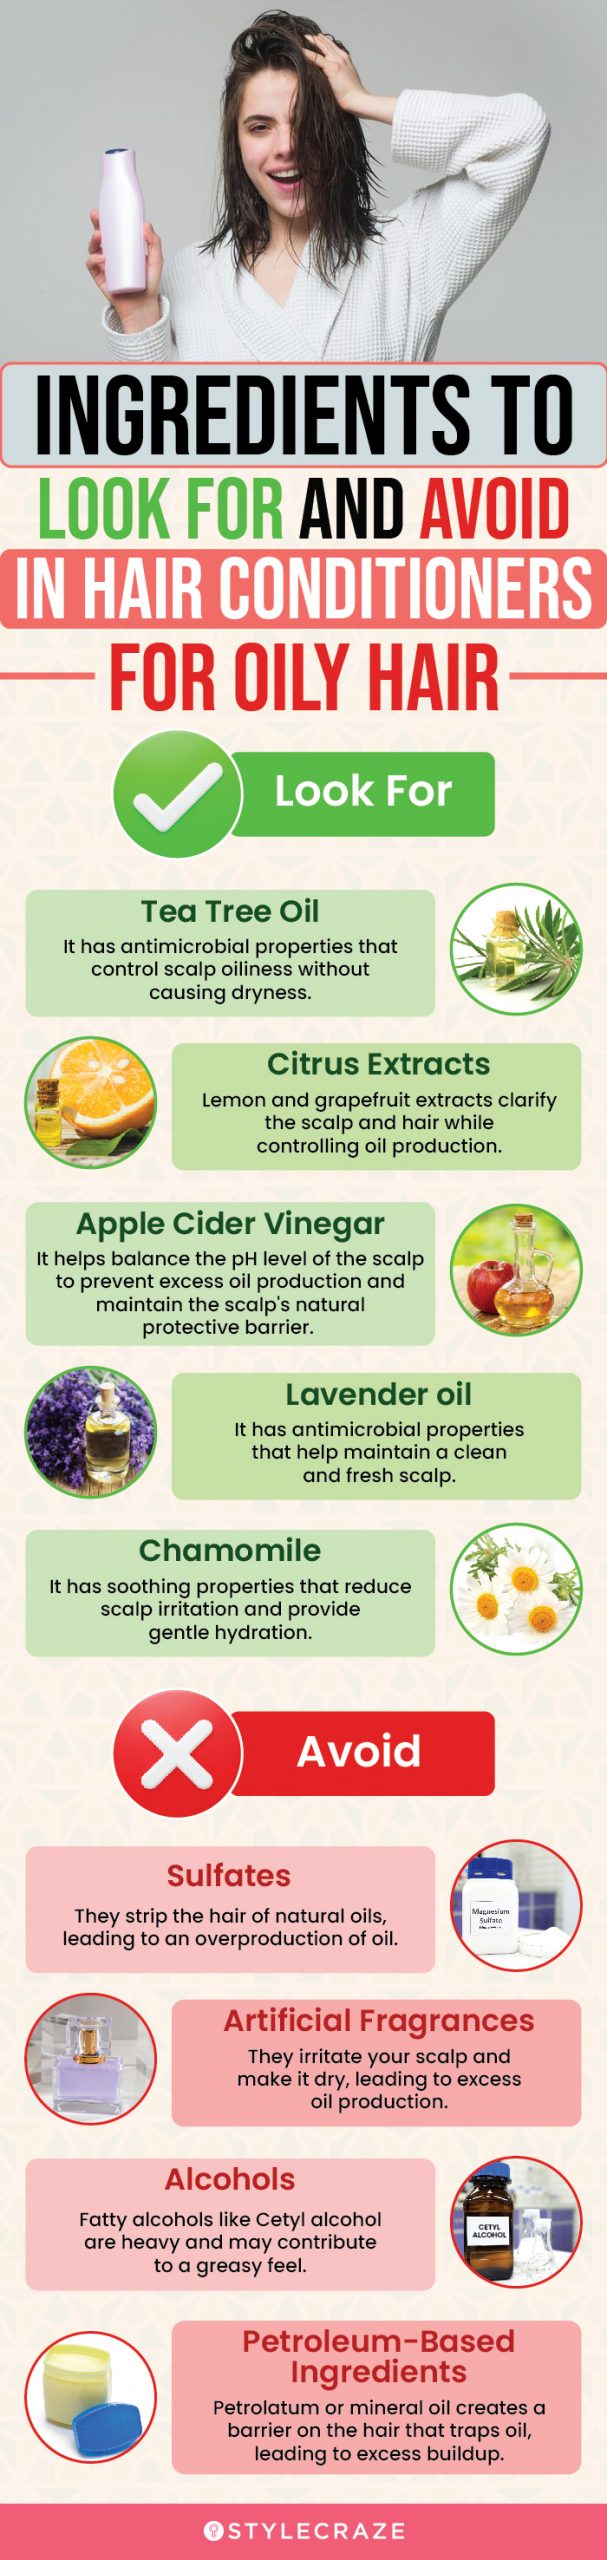  Ingredients To Look For And Avoid In Hair Conditioners For Oily Hair (infographic)